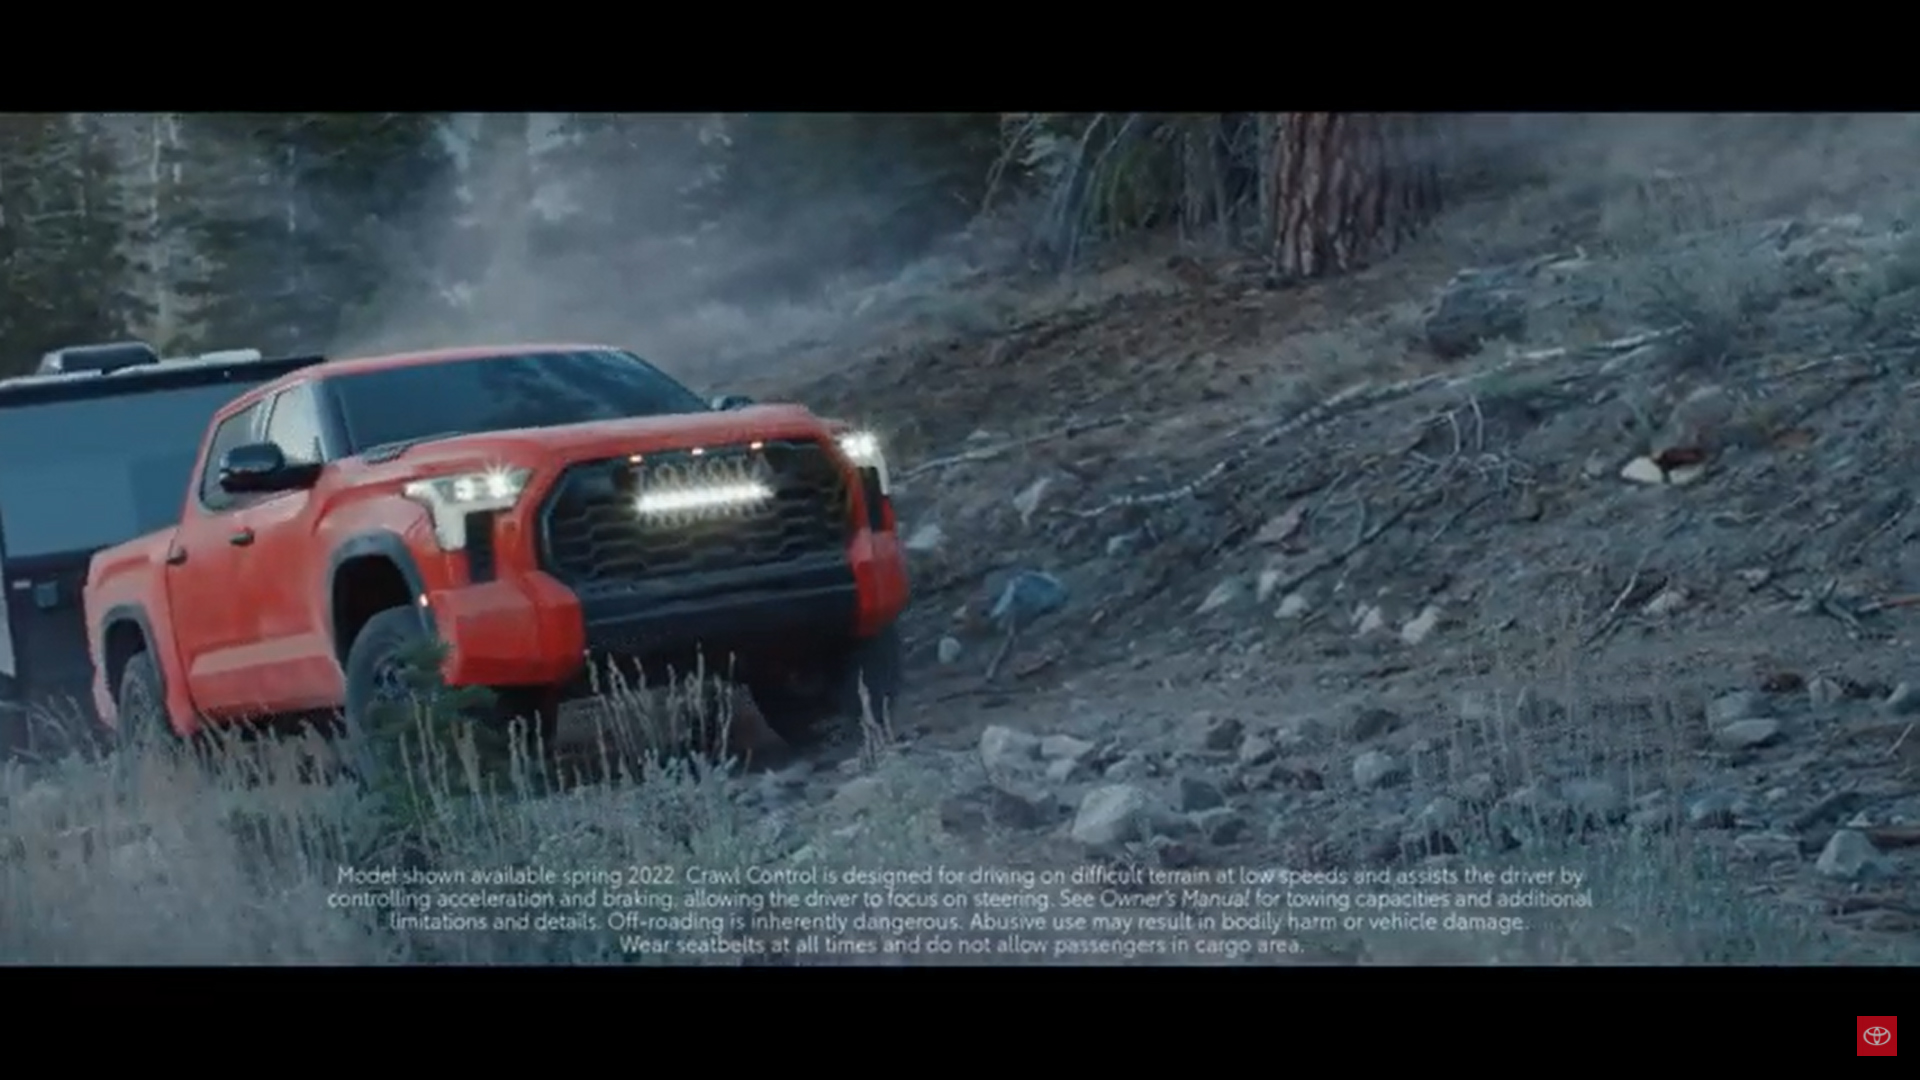 The spot “Born for the Wild” is part of Toyota’s “Born For This” campaign launching the all-new 2022 Tundra.